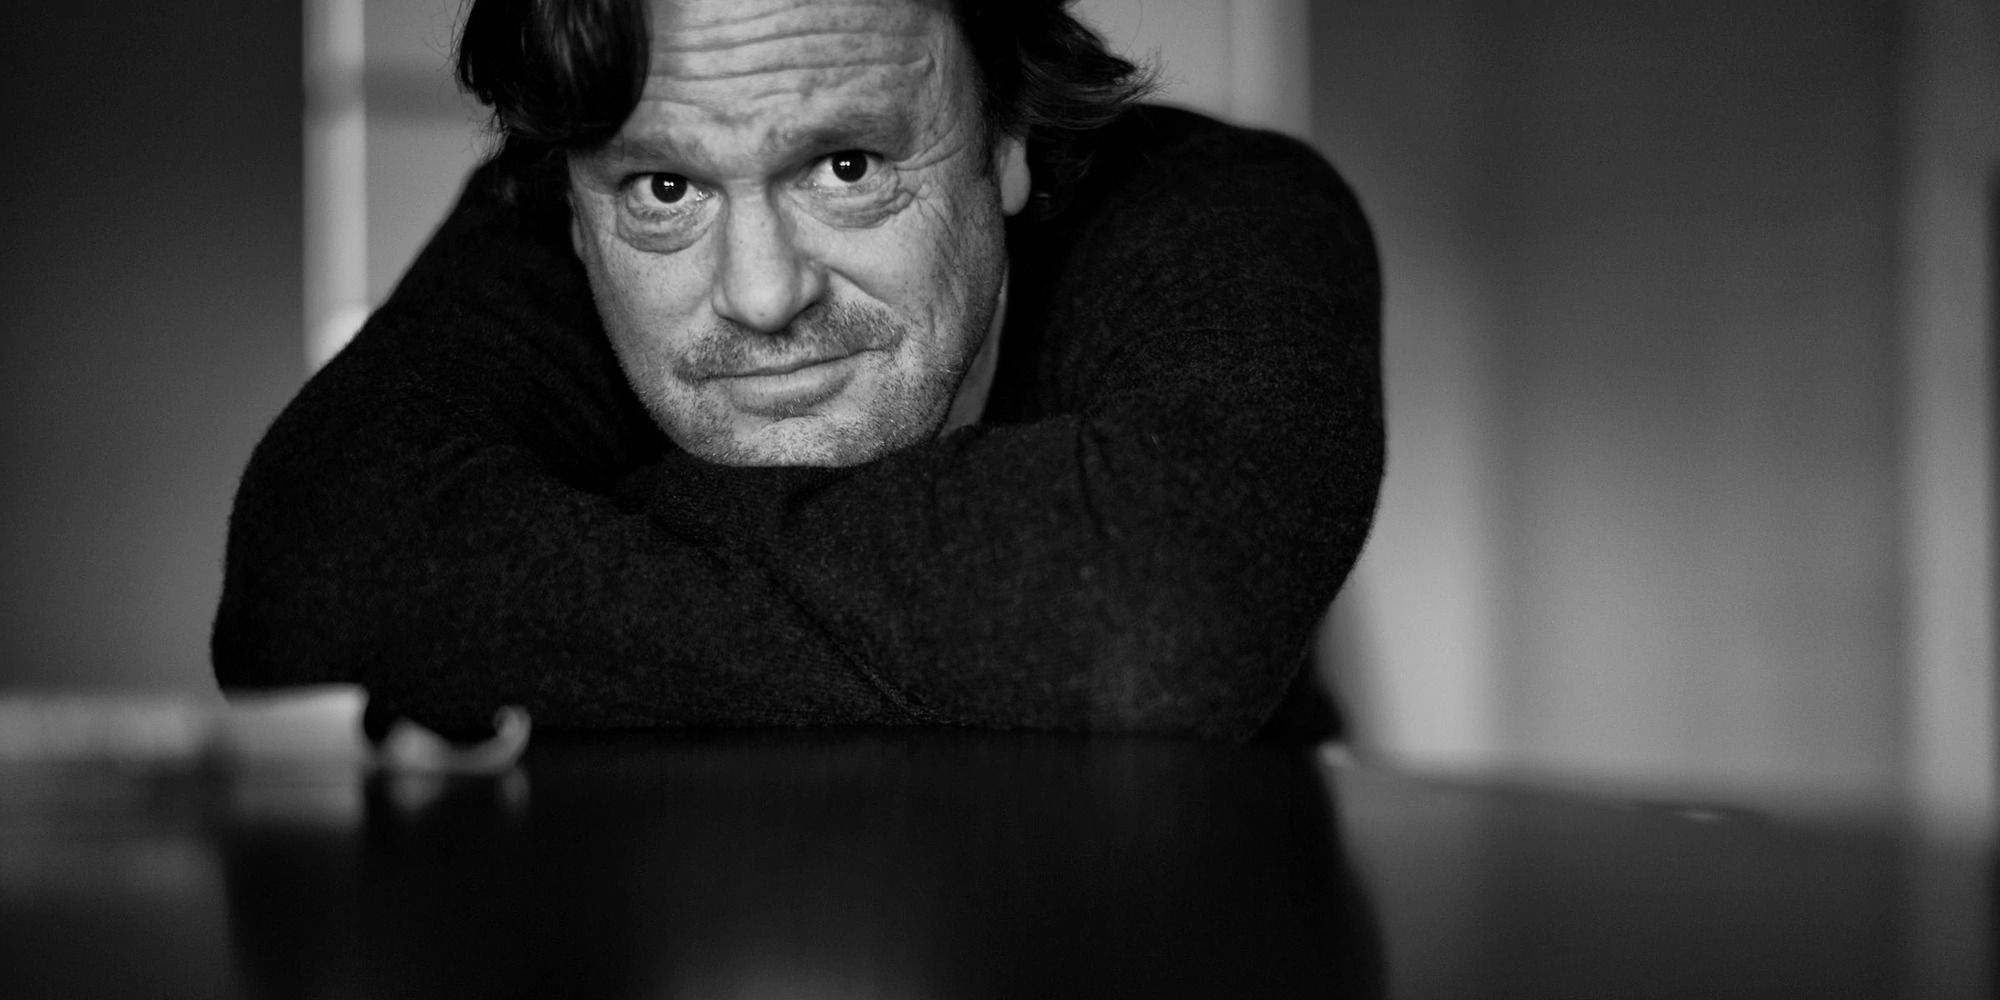 Steve Kloves leaning on a table, photograph in black and white